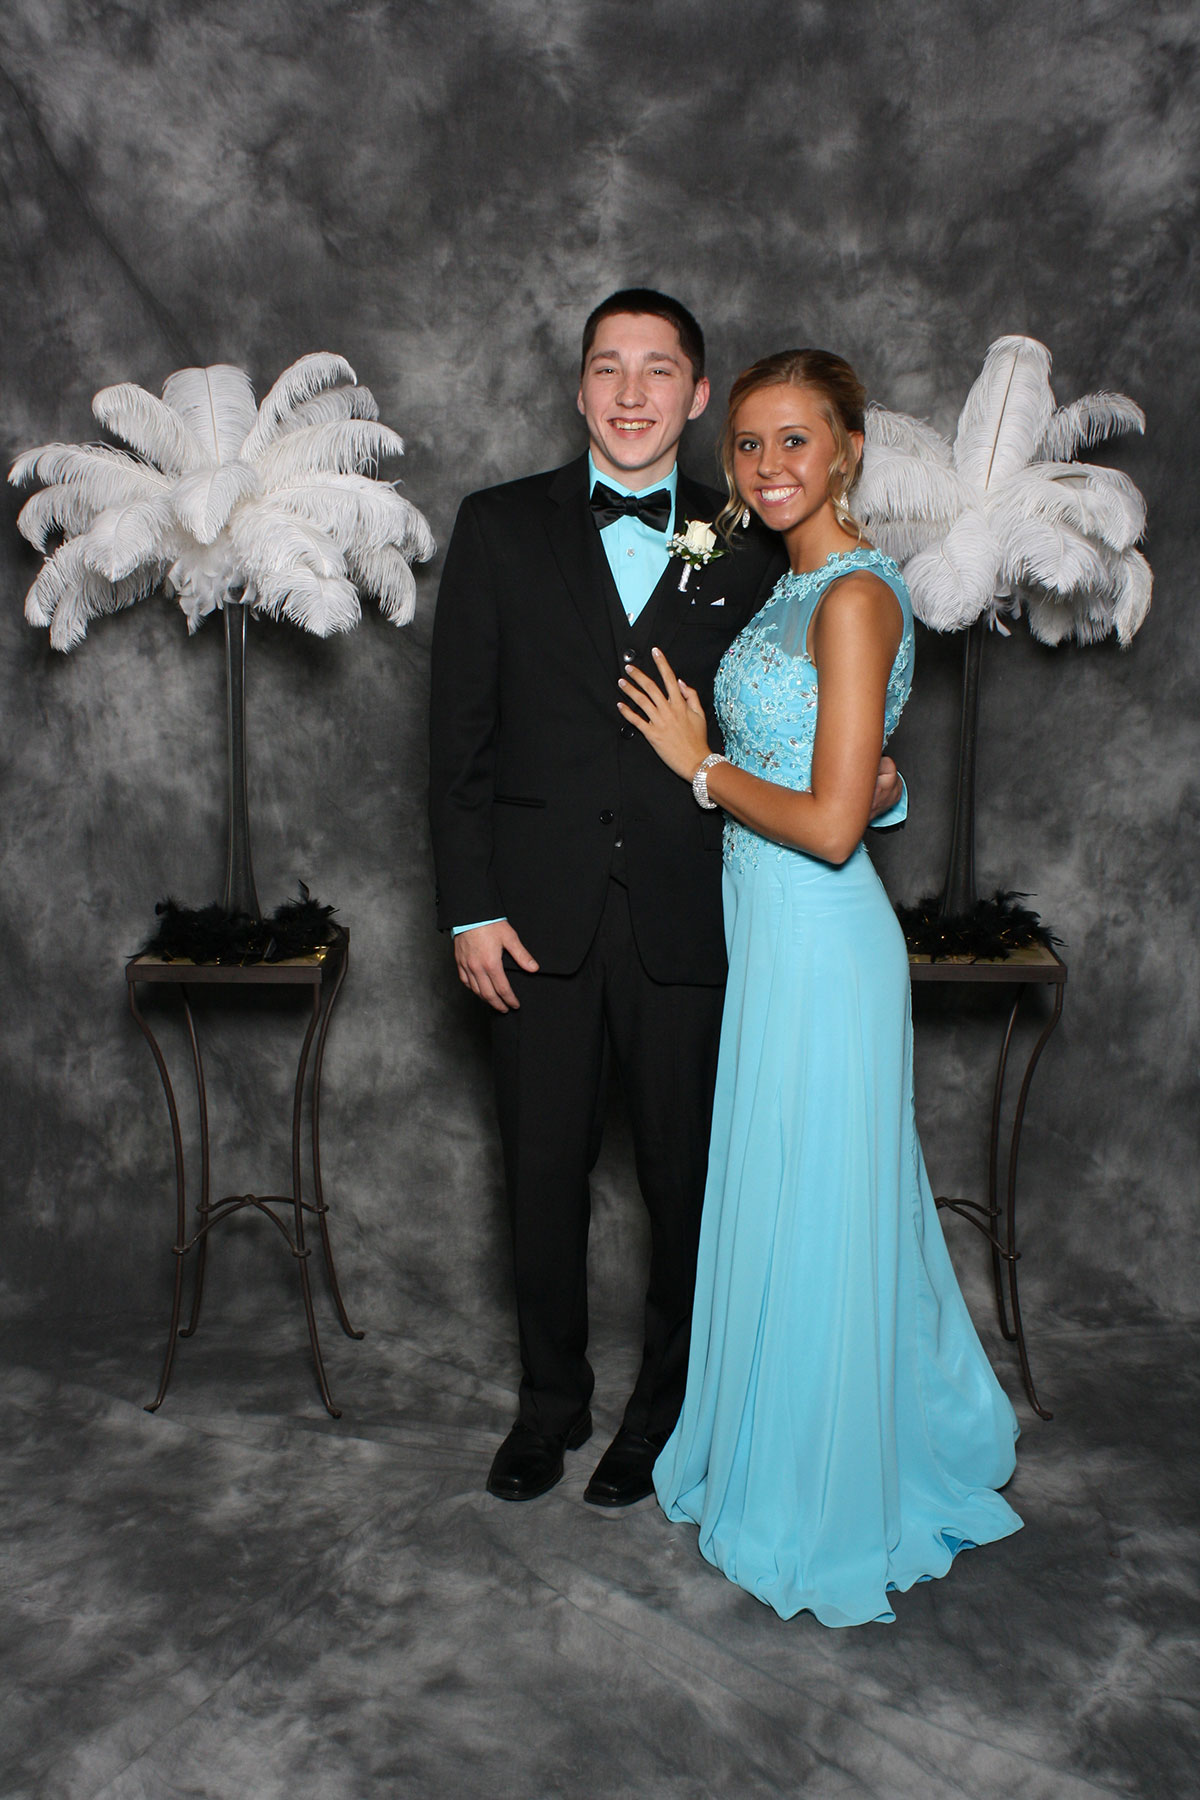 Formal Prom photos that are instantly printed